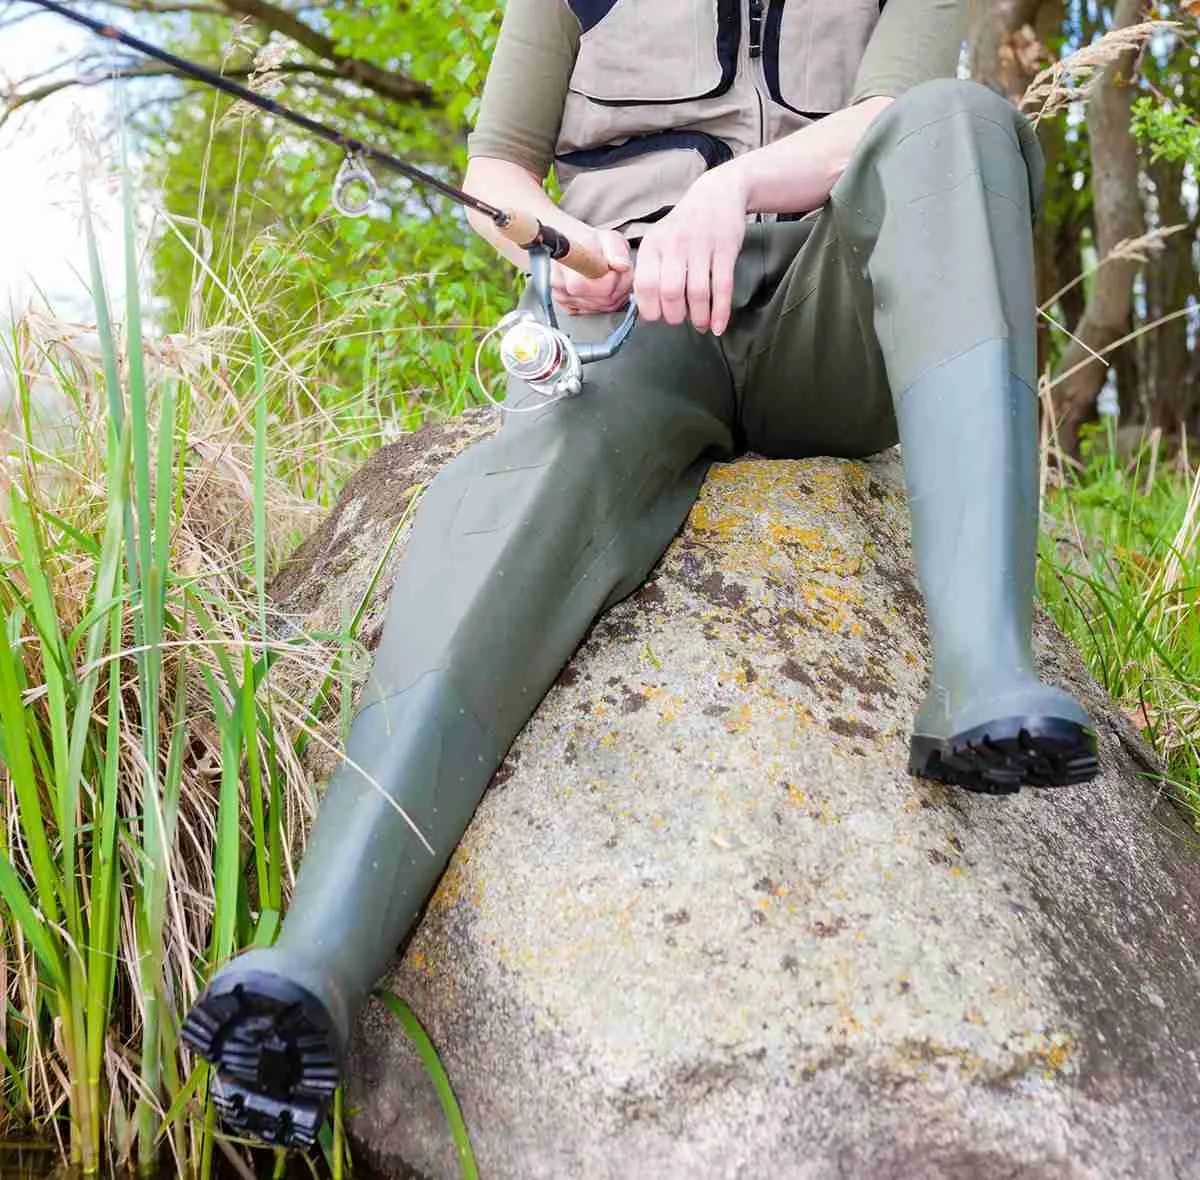 What Footwear To Wear With Waders?